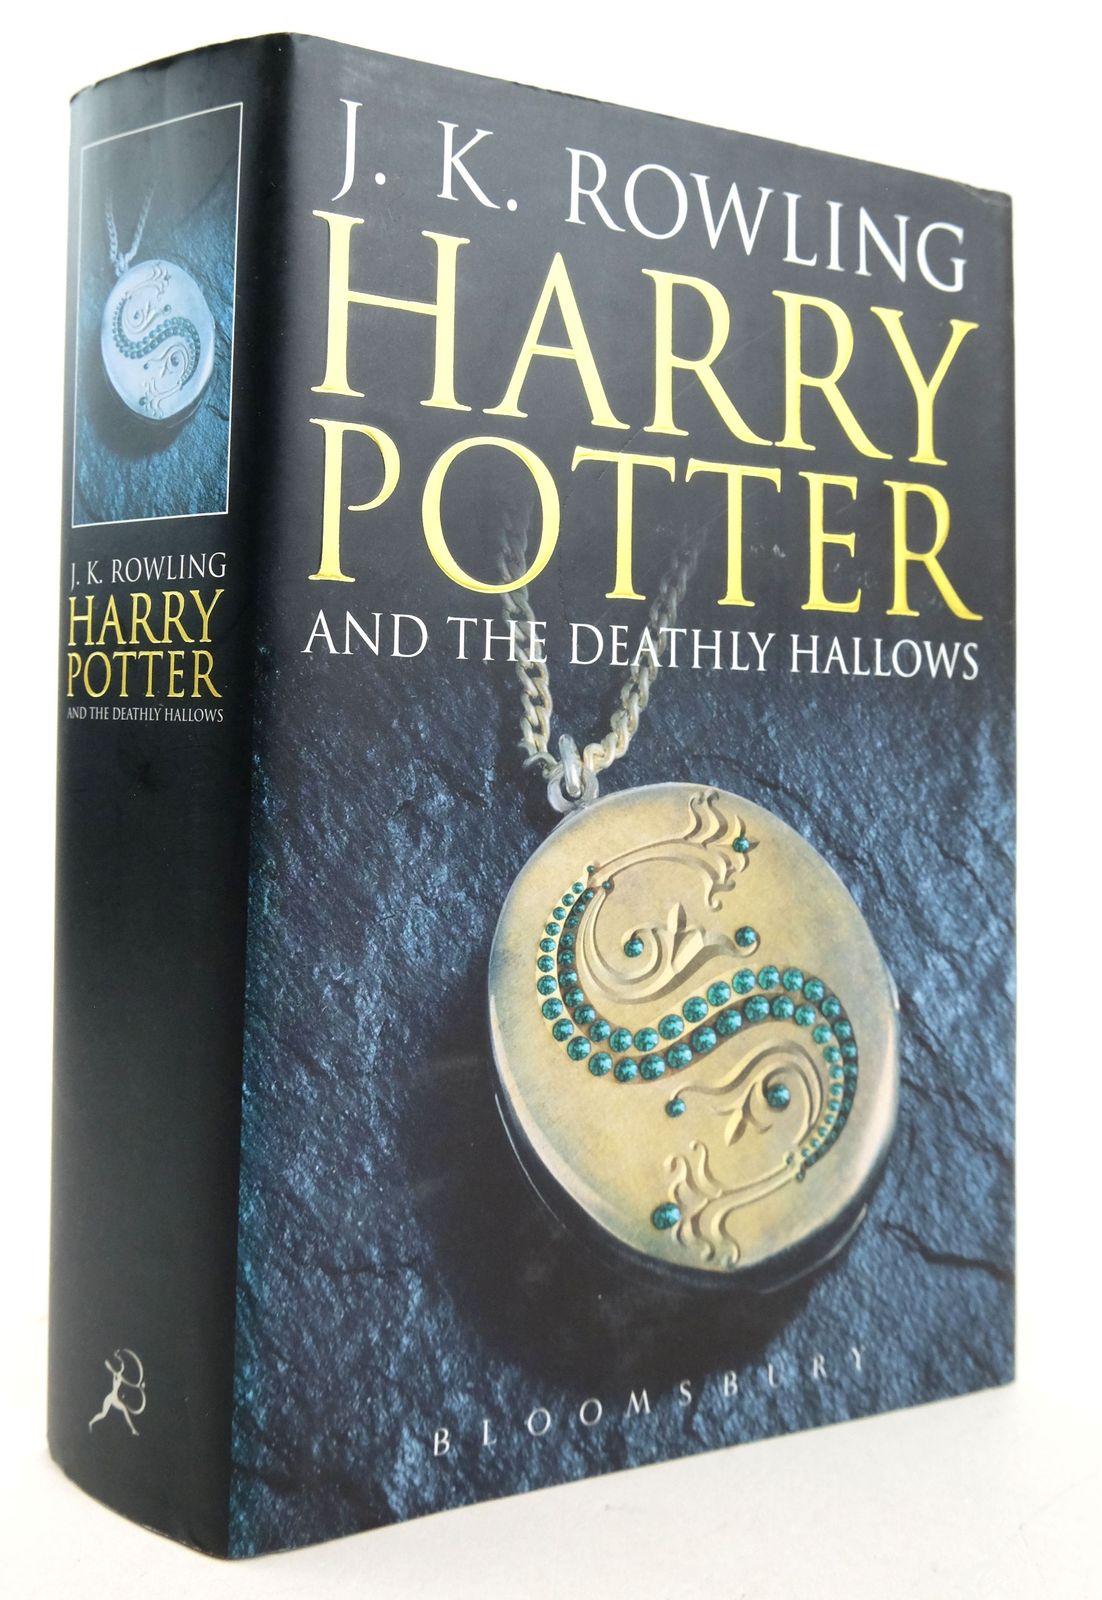 Photo of HARRY POTTER AND THE DEATHLY HALLOWS written by Rowling, J.K. published by Bloomsbury (STOCK CODE: 1819948)  for sale by Stella & Rose's Books